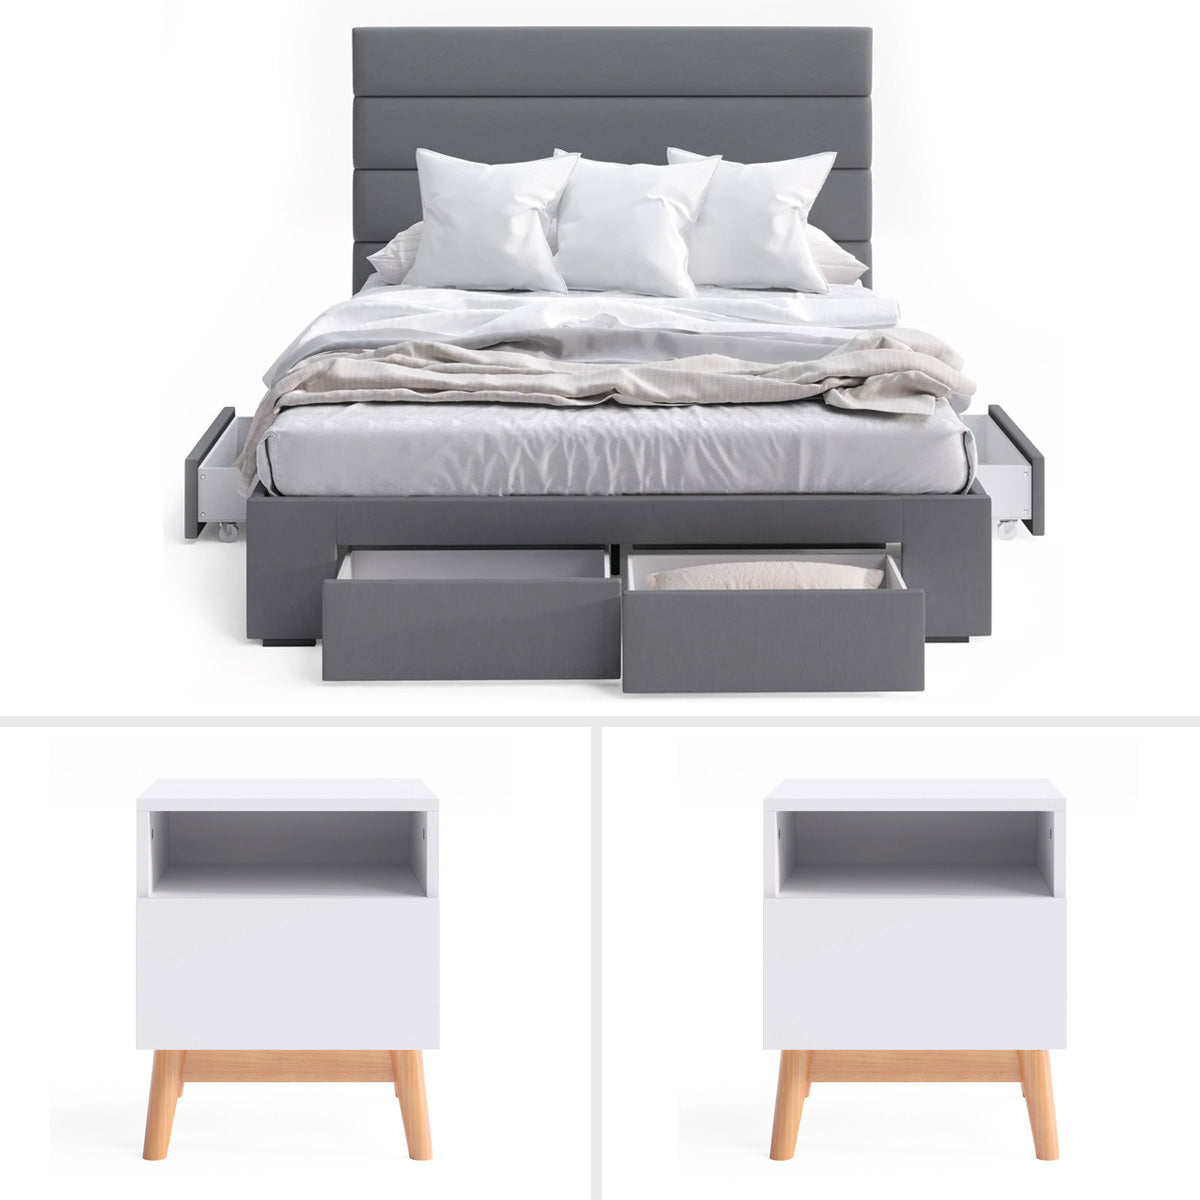 Charcoal Benny Storage Bed Frame with Aspen Bedside Tables Package